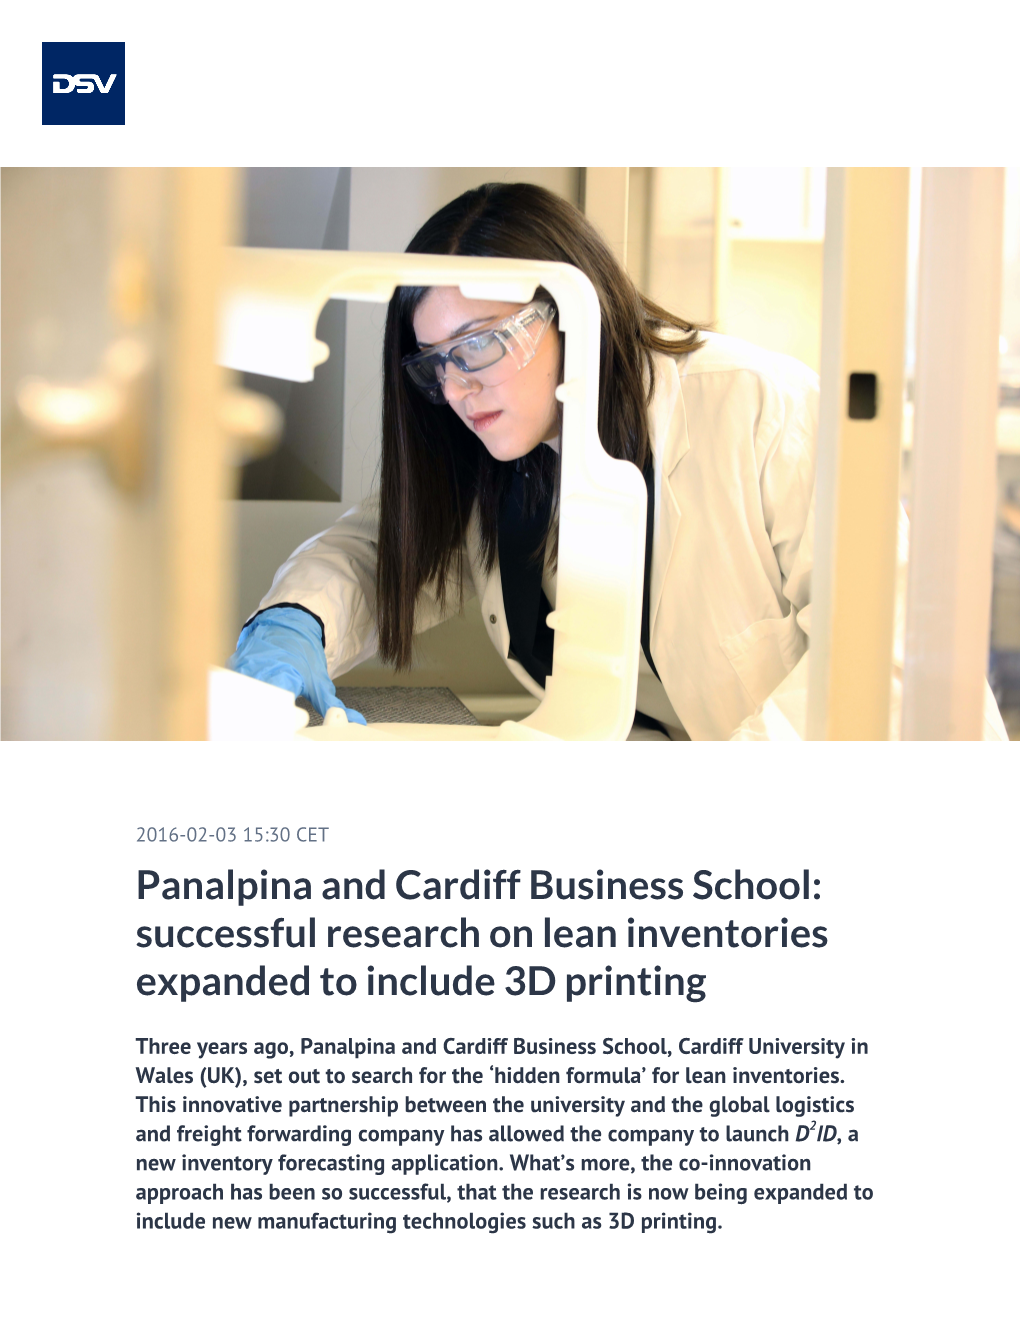 Panalpina and Cardiff Business School: Successful Research on Lean Inventories Expanded to Include 3D Printing